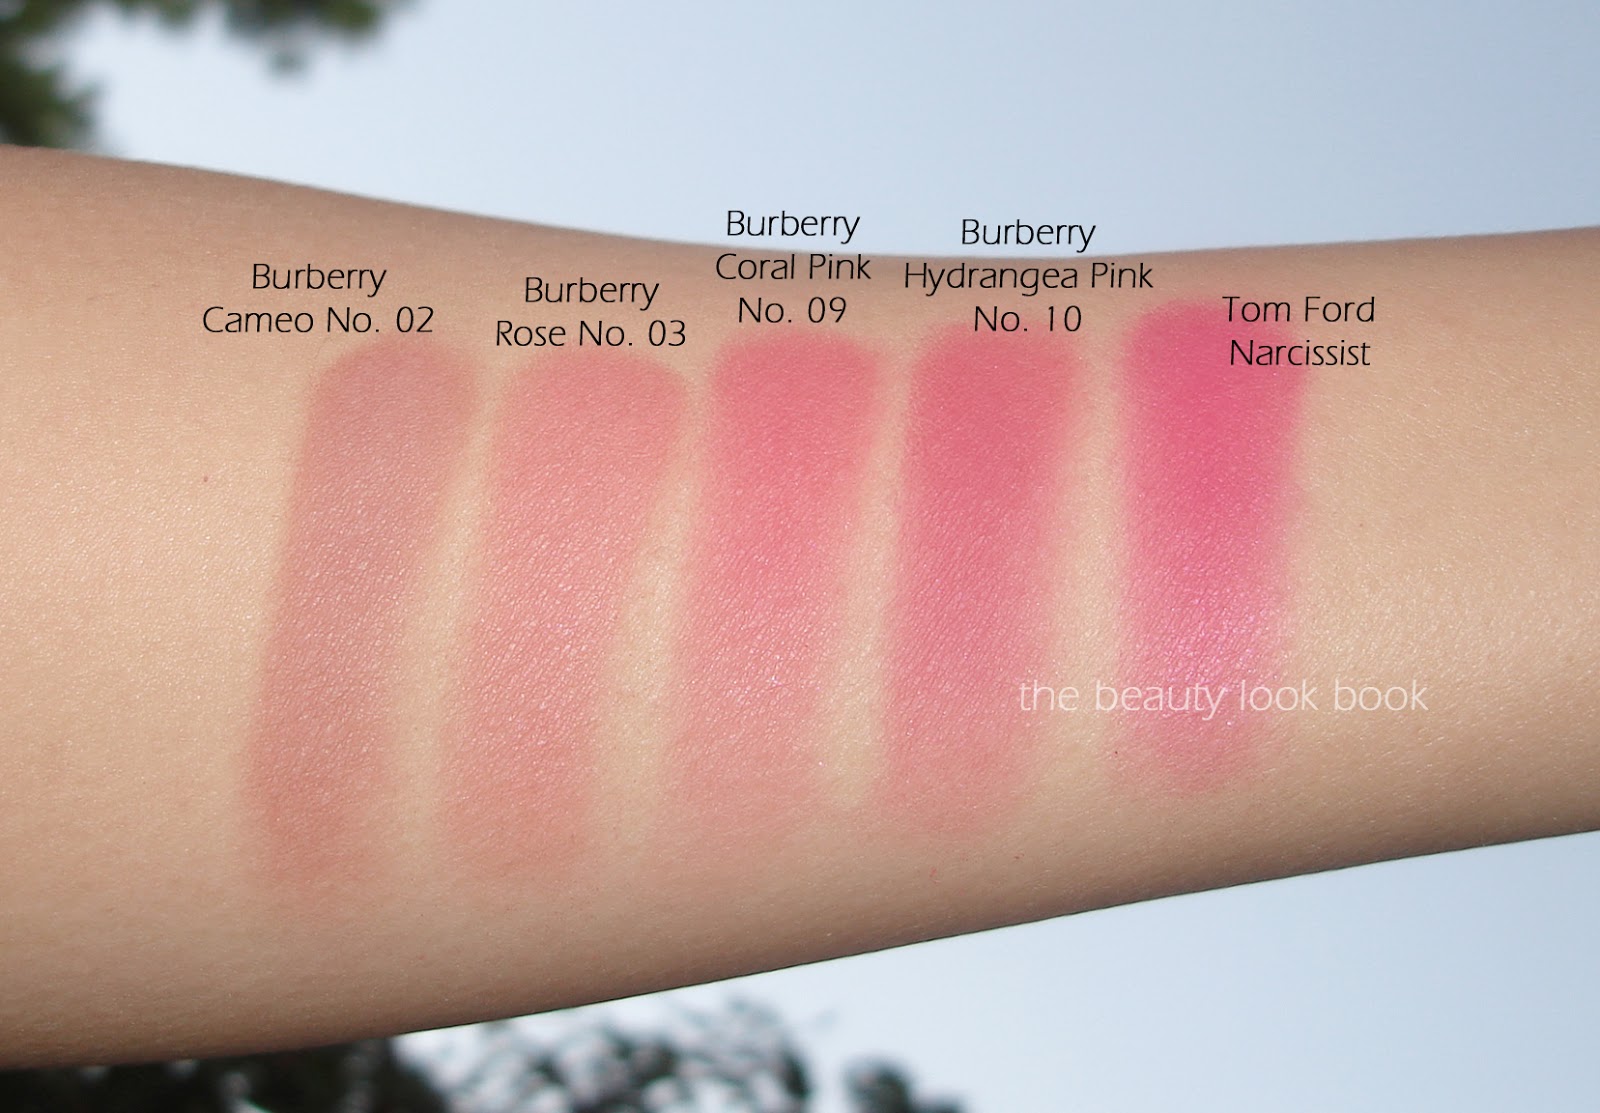 Burberry Siren Red Light Glow Blushes - Coral Pink No. 9 and Hydrangea Pink  No. 10 - The Beauty Look Book